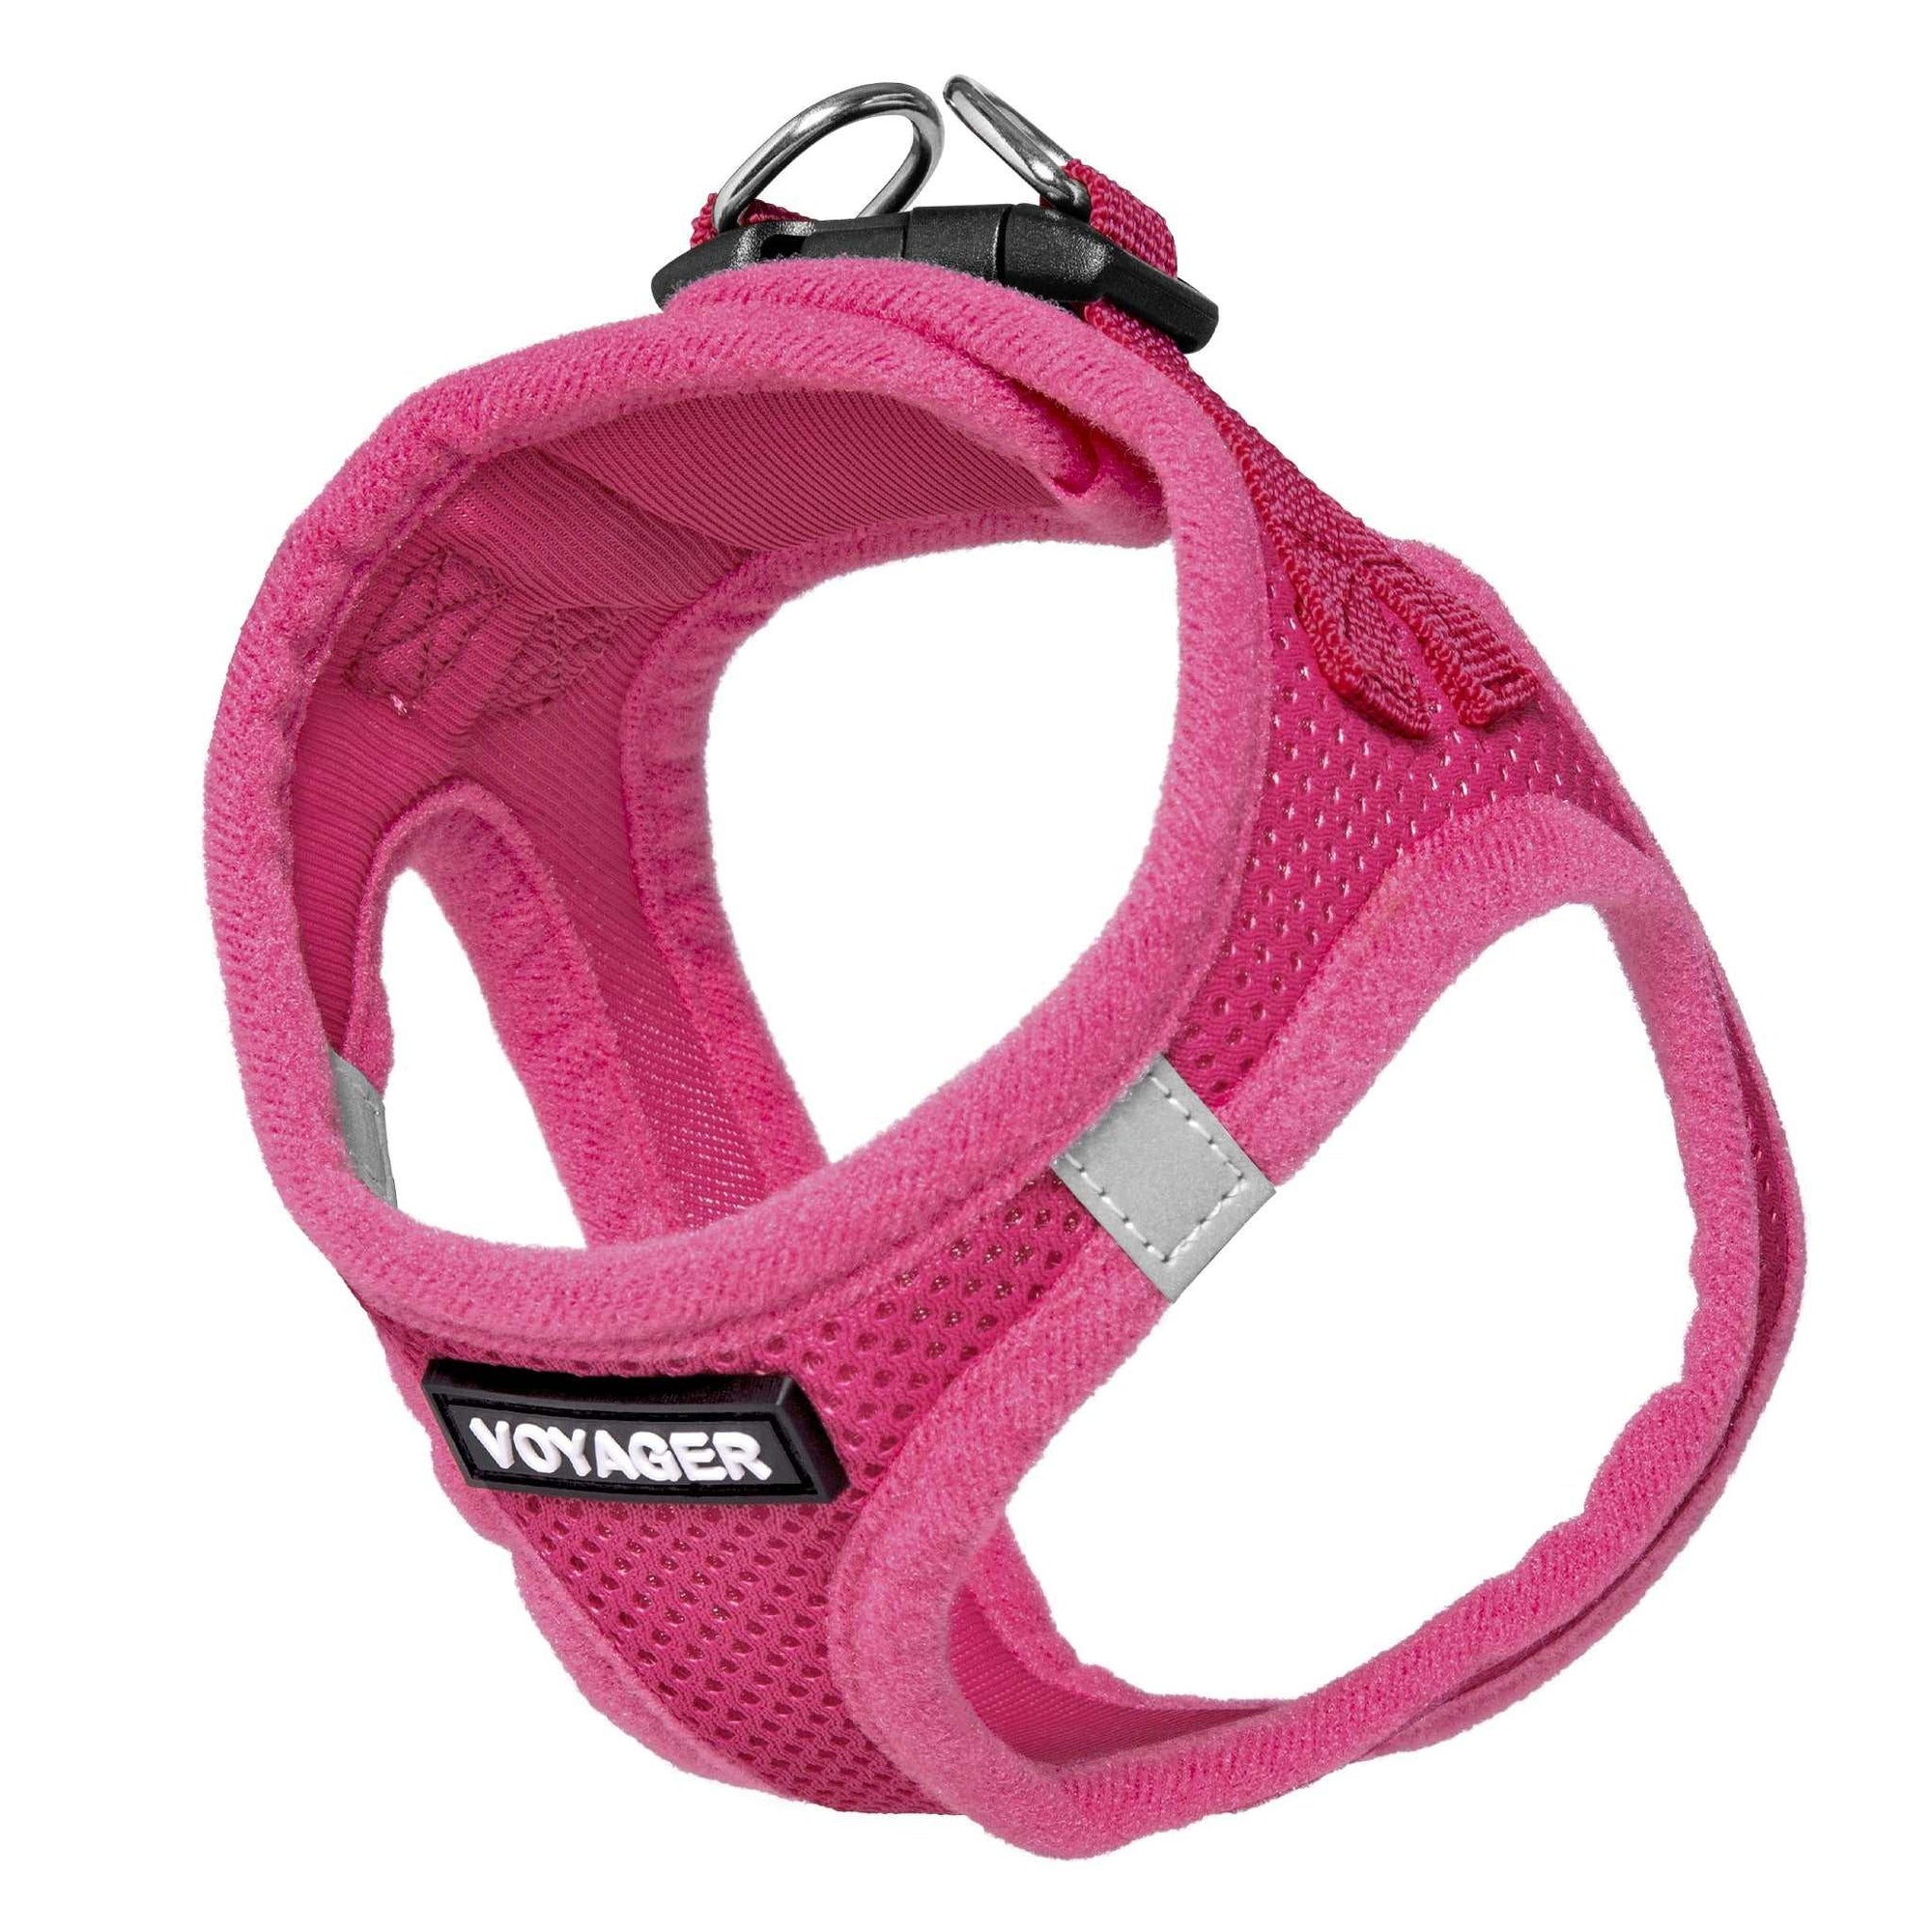 VOYAGER Step-In Air Pet Harness in Fuchsia with Matching Trim and Webbing - Expanded